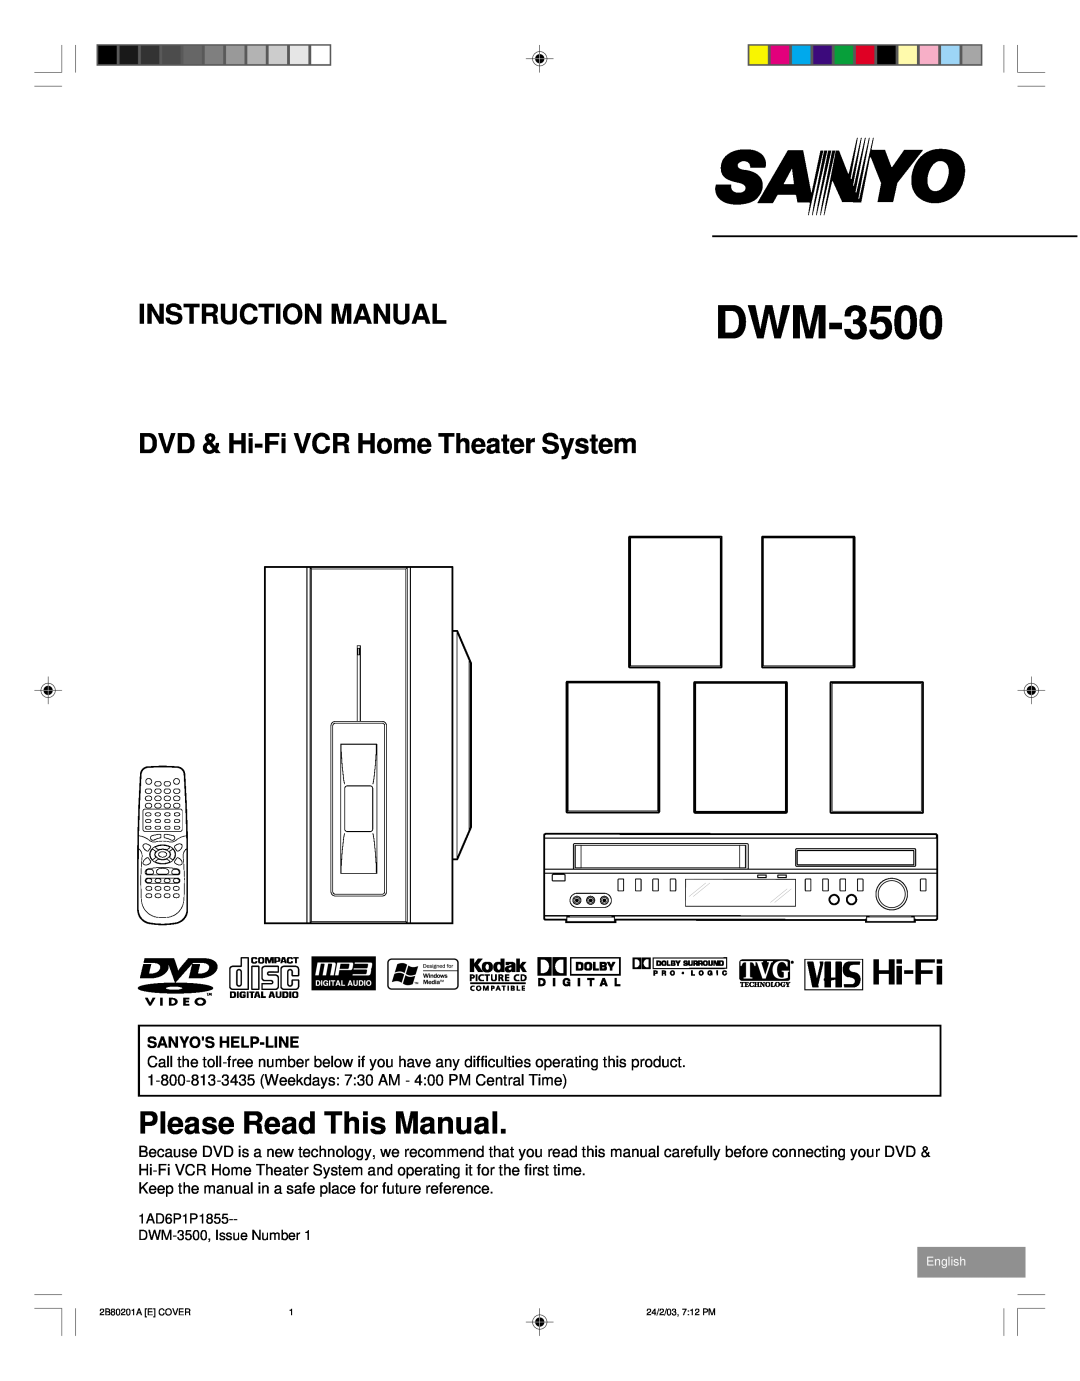 Sanyo DWM-3500 instruction manual Please Read This Manual, DVD & Hi-FiVCR Home Theater System, Sanyos Help-Line 